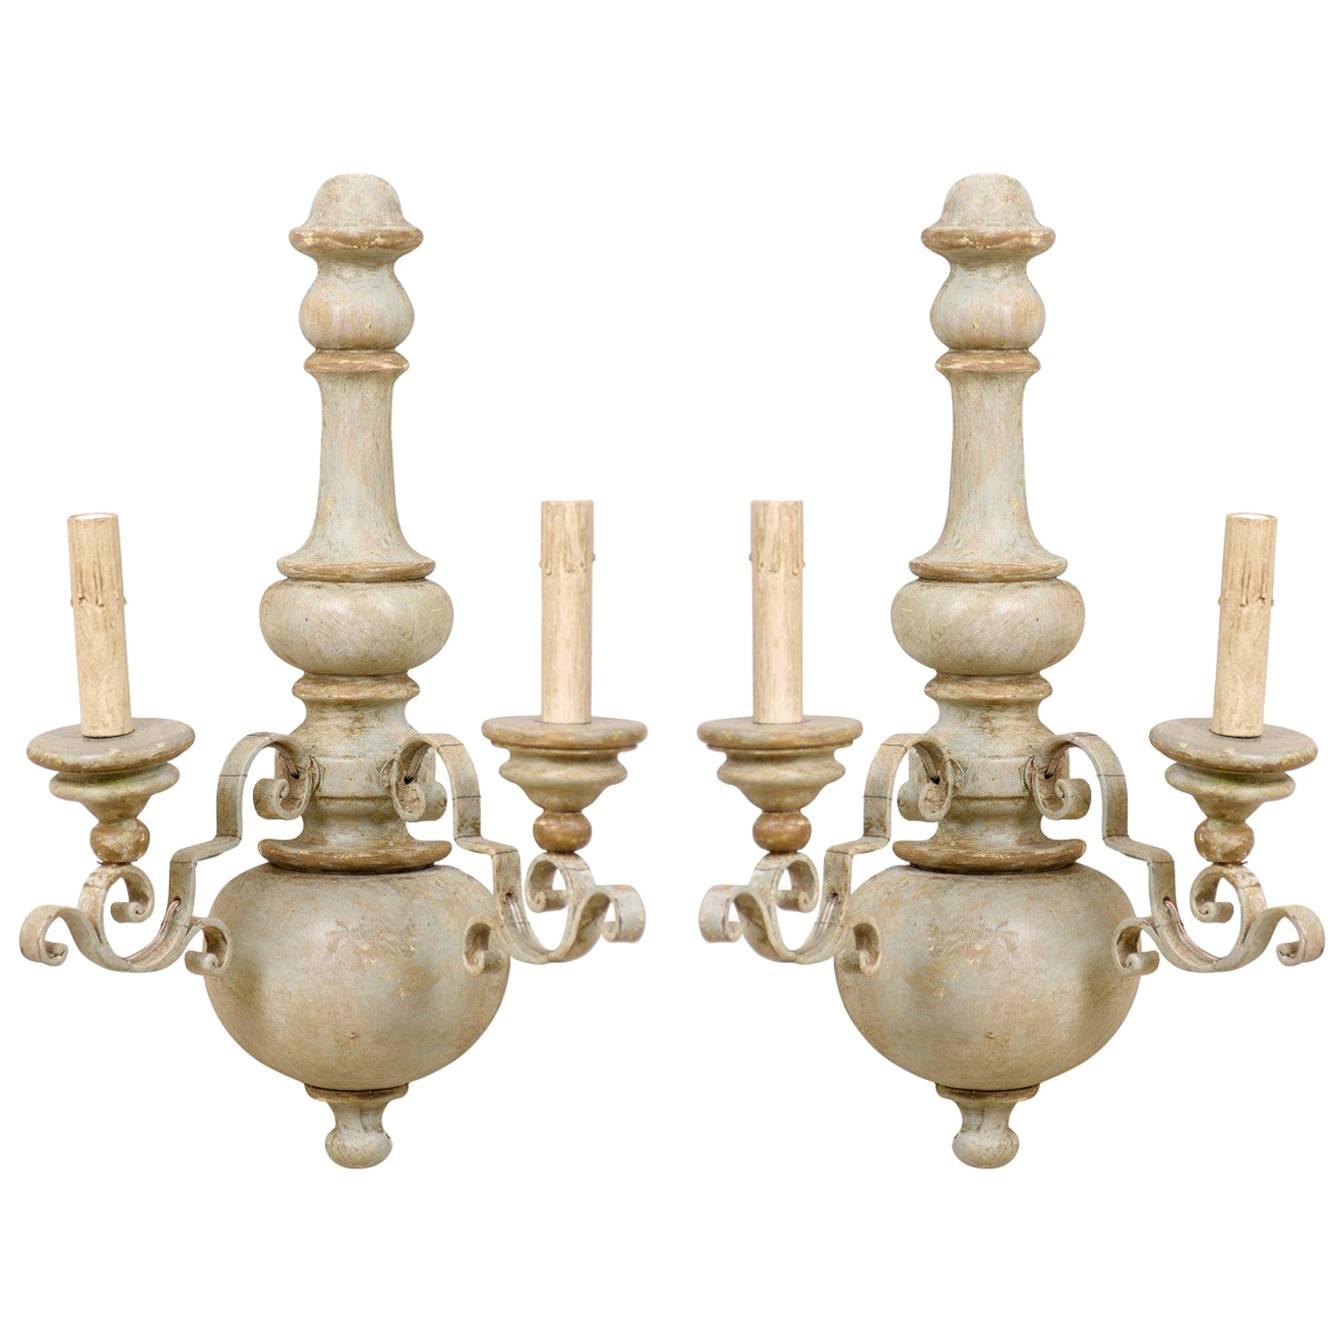 Pair of Painted Metal and Turned Wood Two-Light Sconces with Ornate Scroll Arms